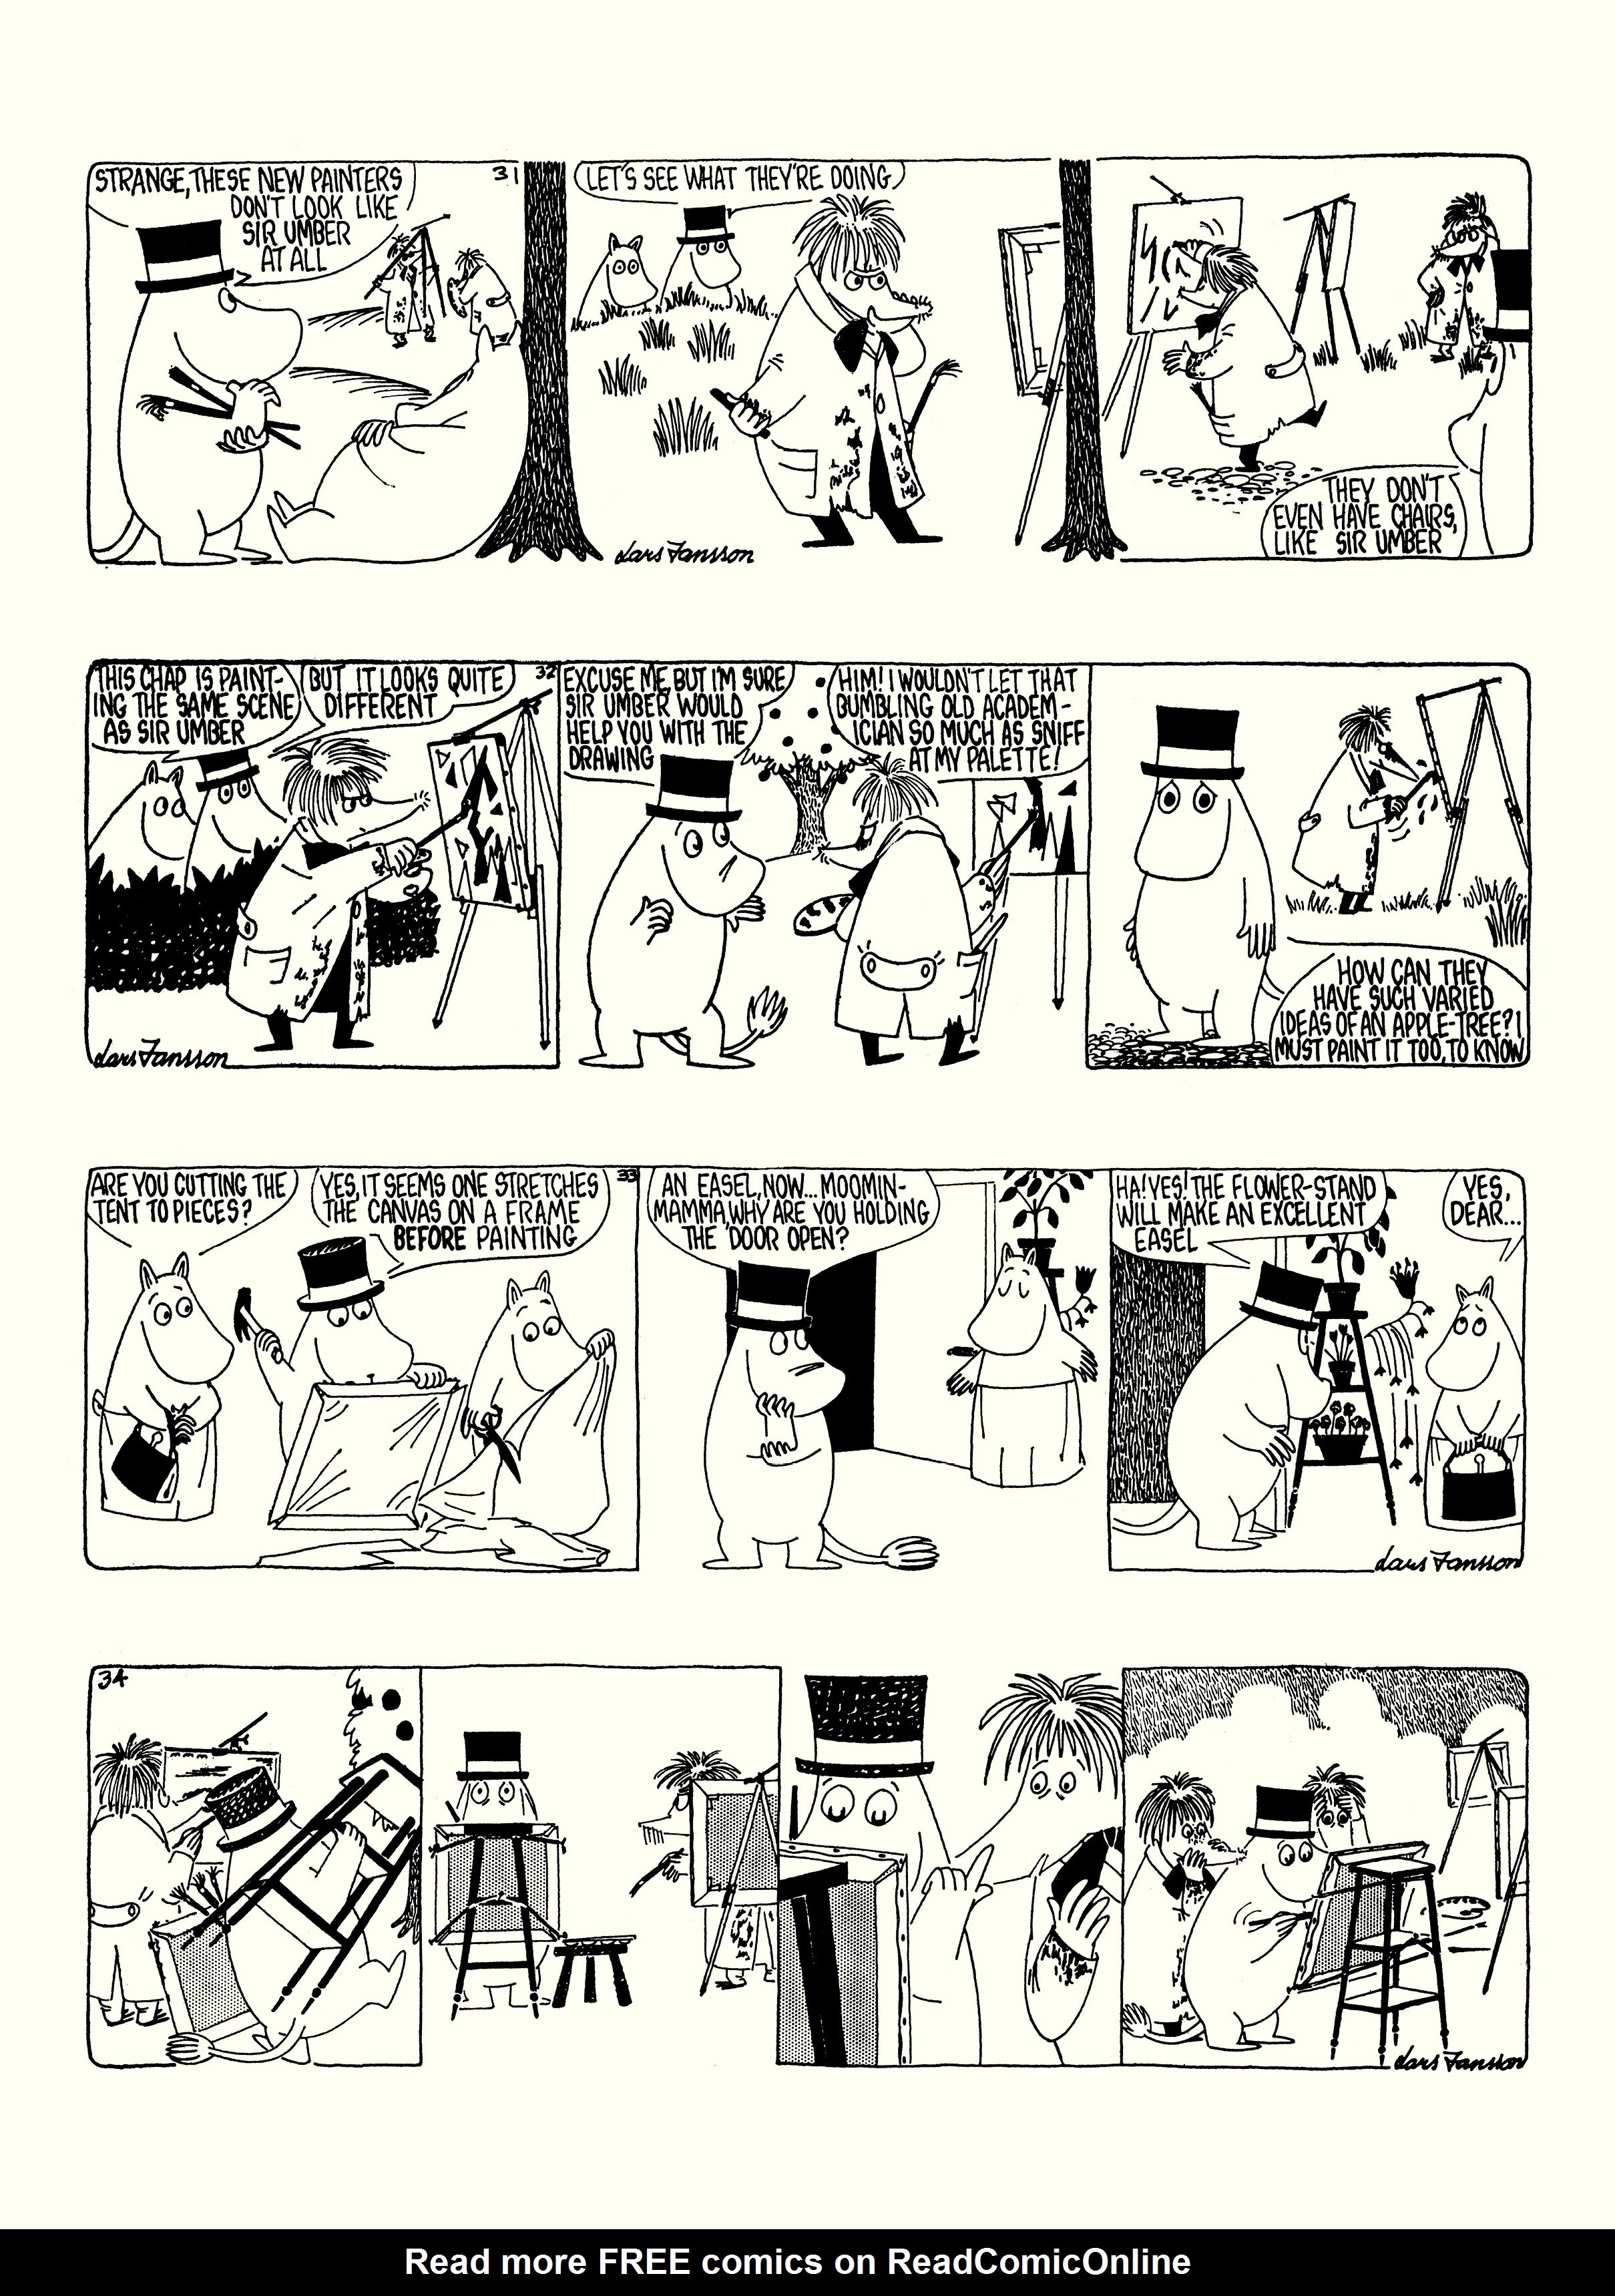 Read online Moomin: The Complete Lars Jansson Comic Strip comic -  Issue # TPB 8 - 35